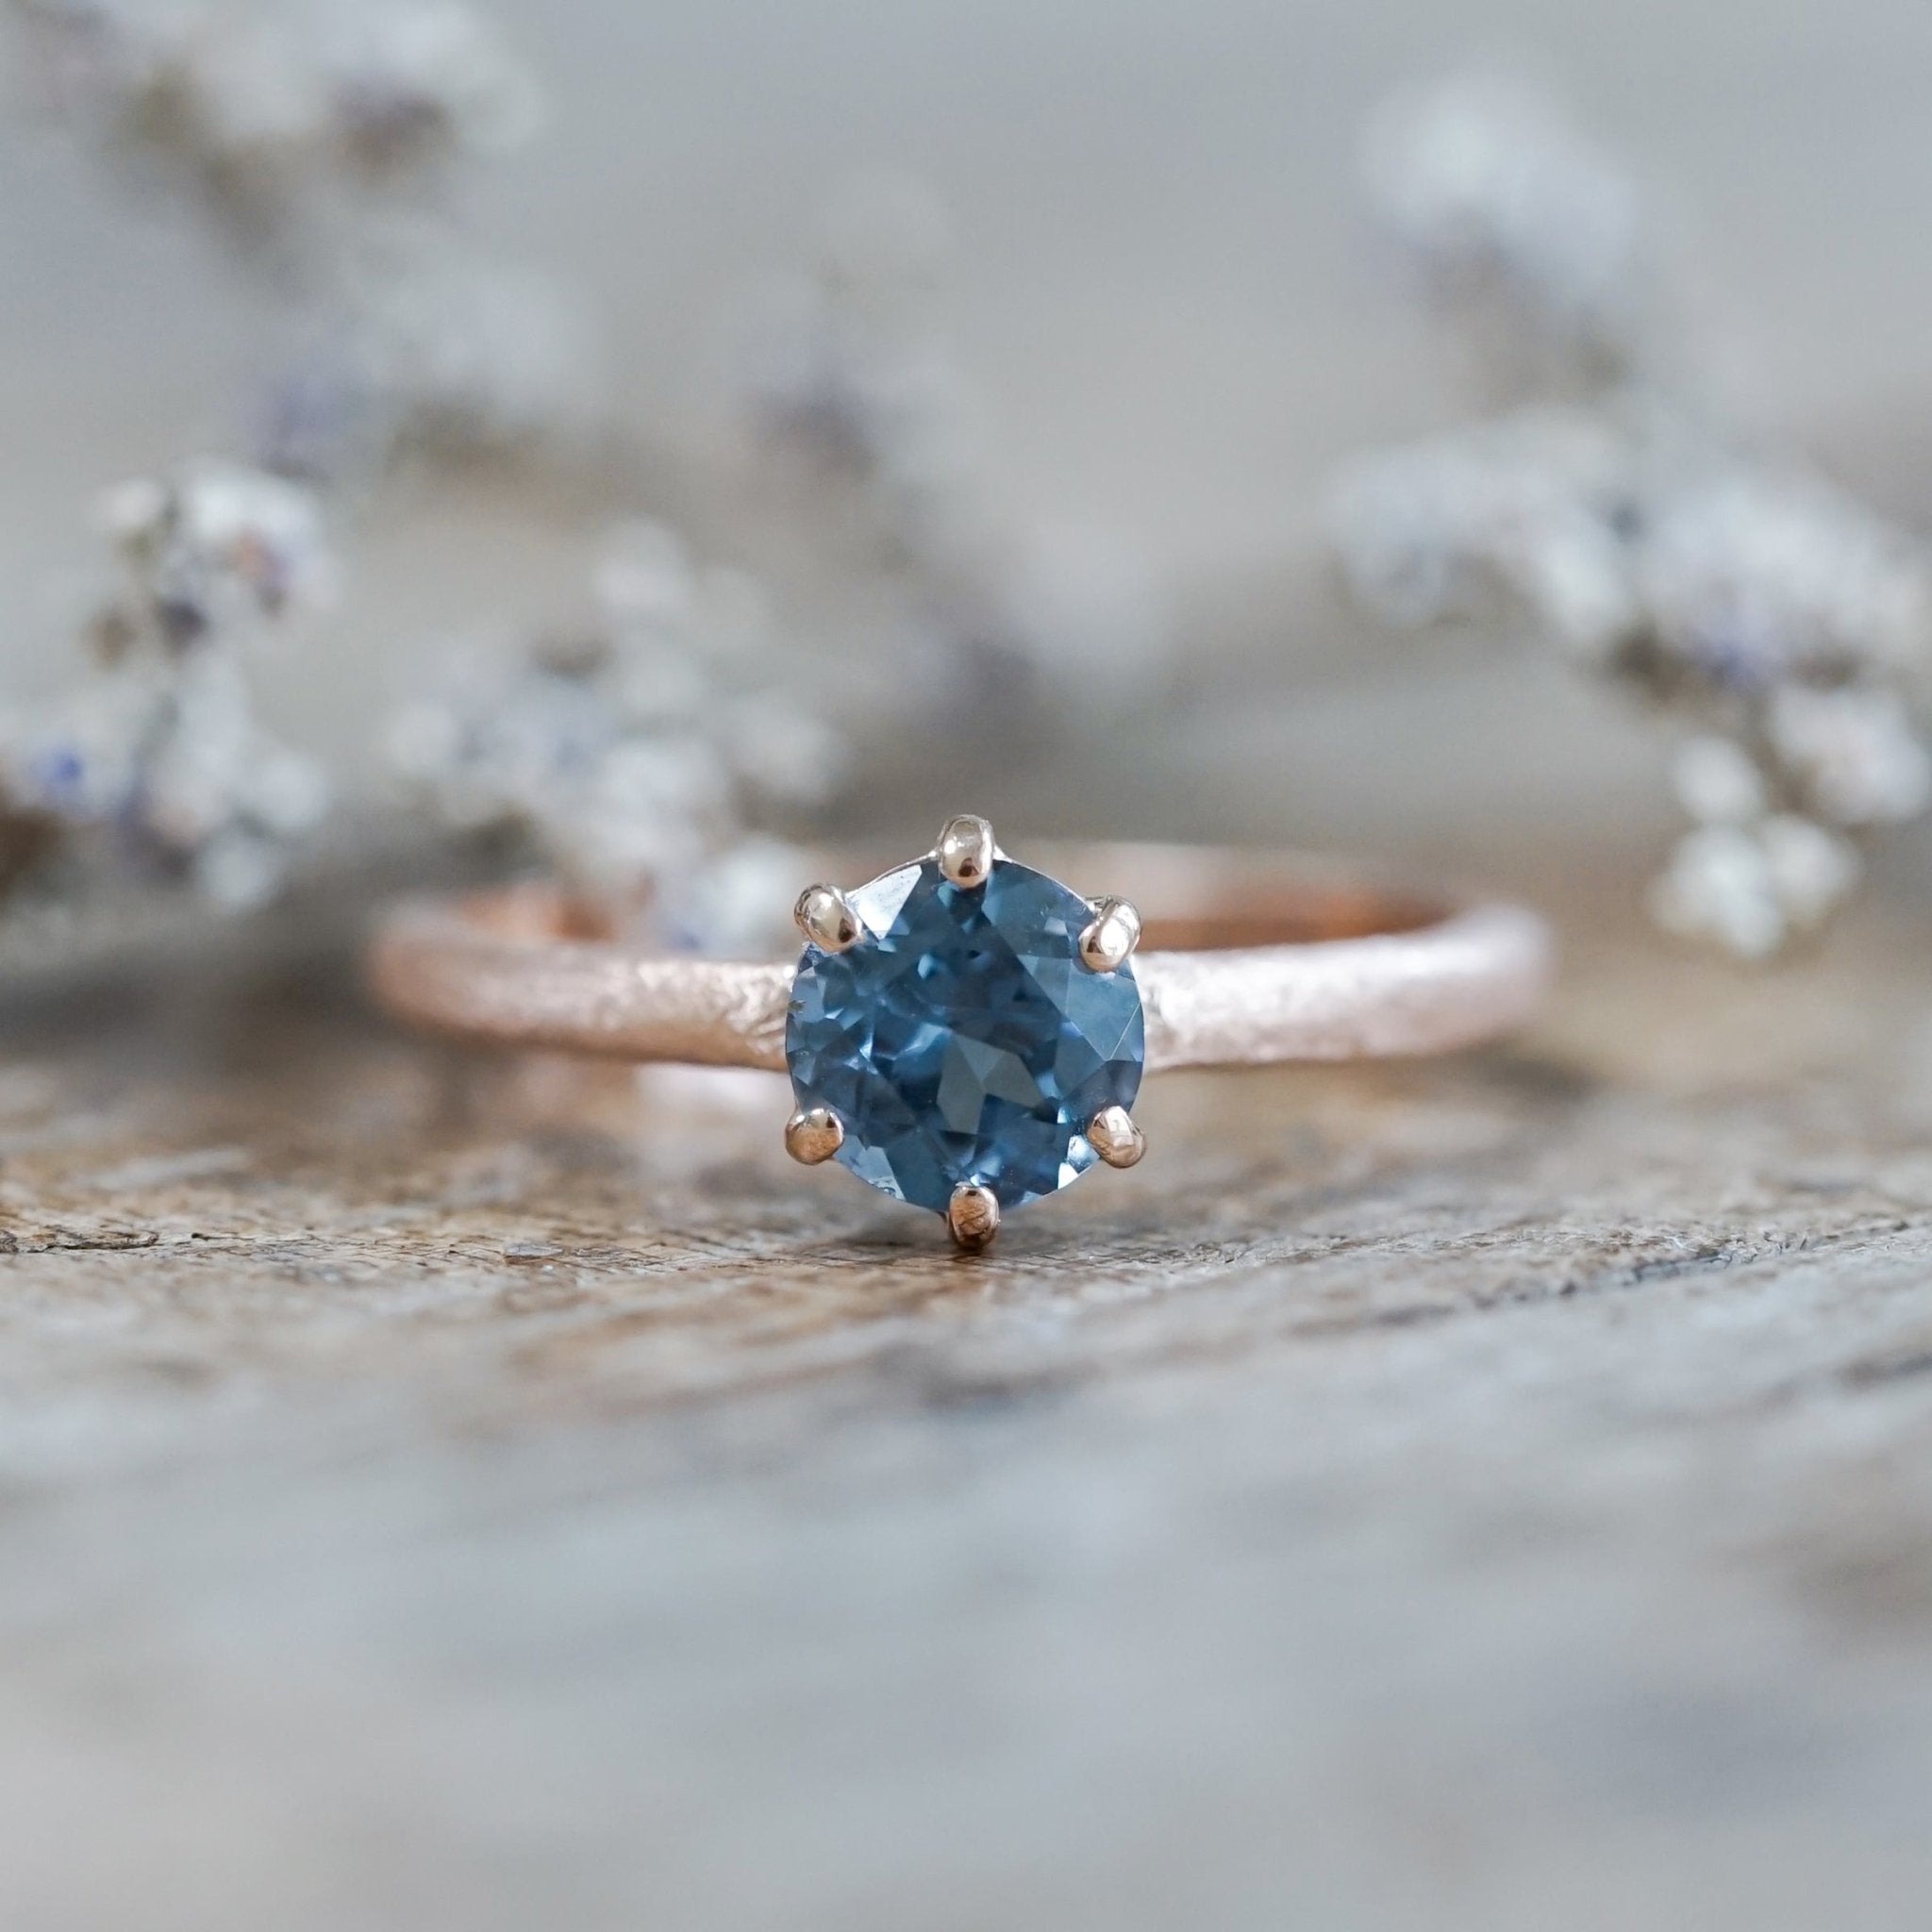 rose gold engagement rings with sapphire